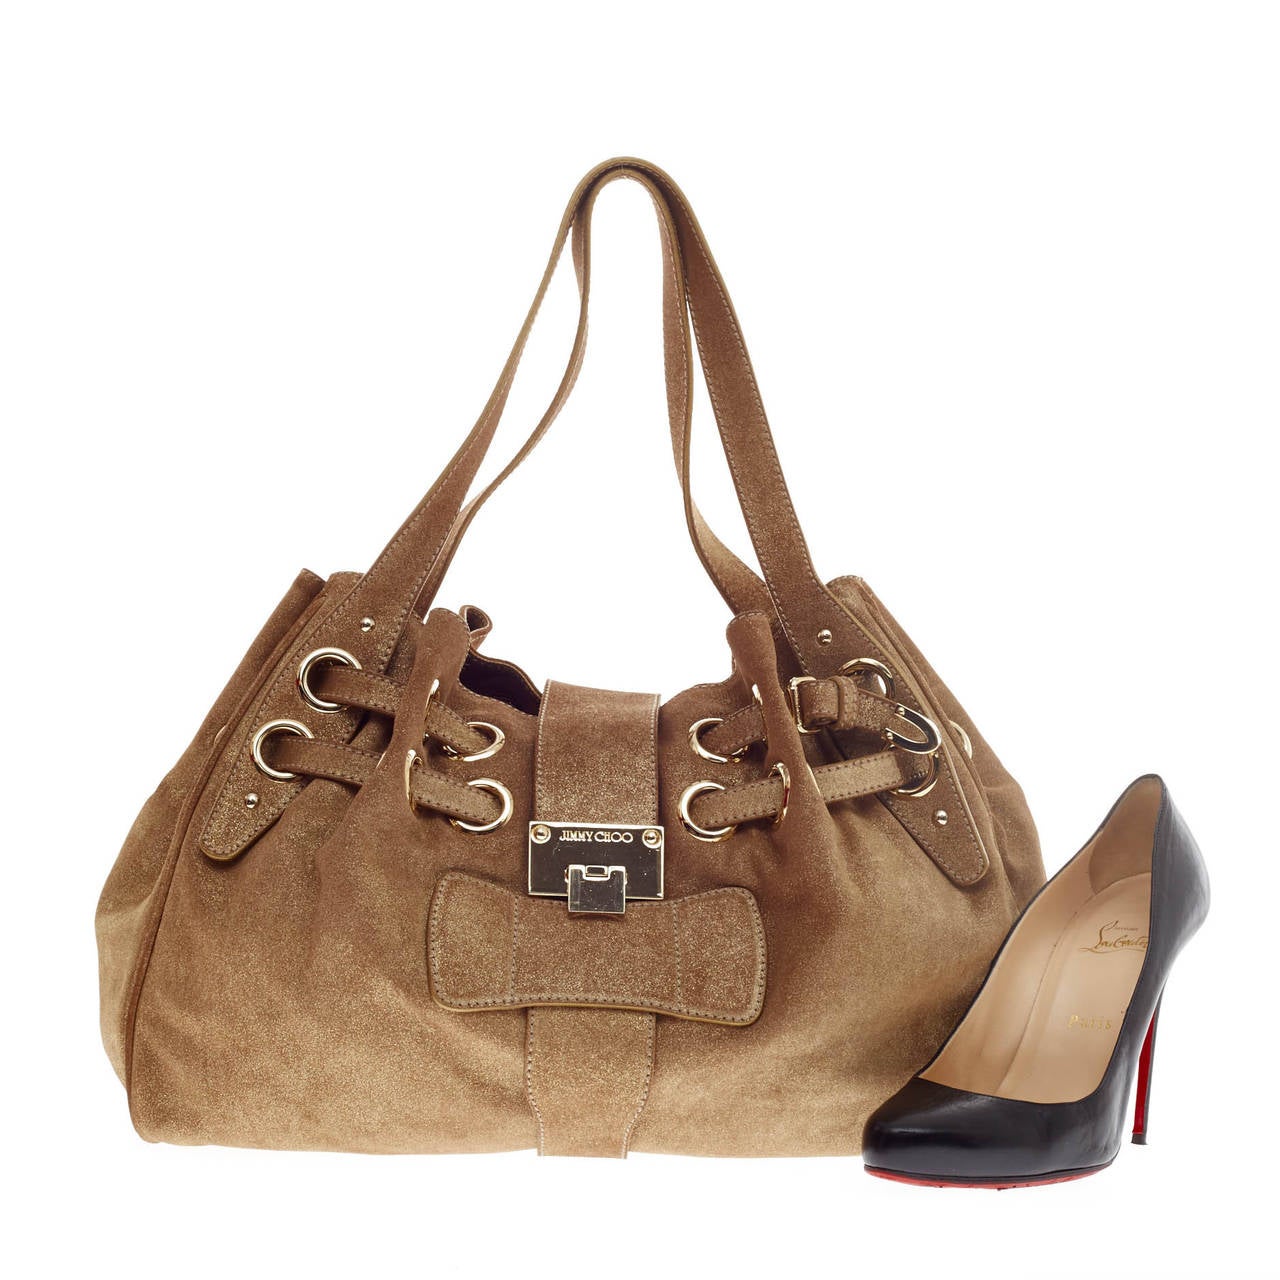 This authentic Jimmy Choo Riki Hobo Suede Medium constructed in shimmery gold suede showcases a feminine yet stylish bag perfect for the modern woman. This eye-catching shoulder bag features adjustable straps woven through oversized grommet rings